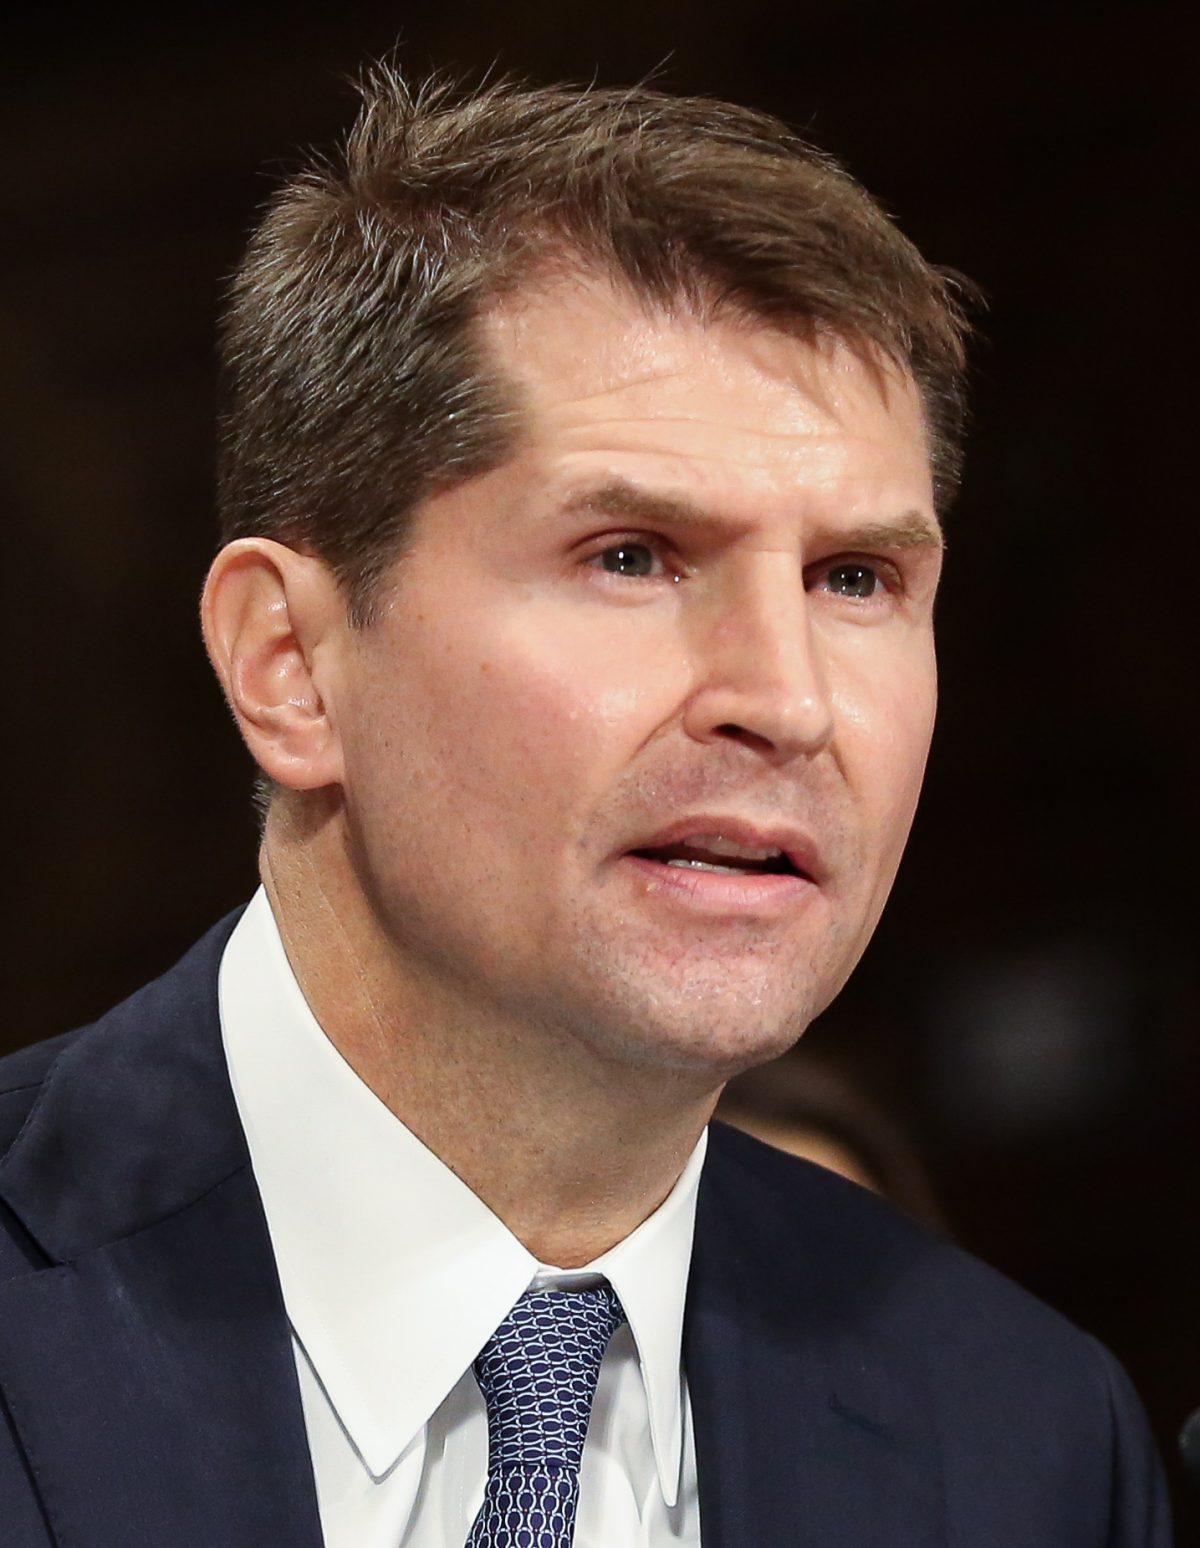 Bill Priestap, former assistant director of the FBI's Counterintelligence Division, in a file image. (Jennifer Zeng/The Epoch Times)